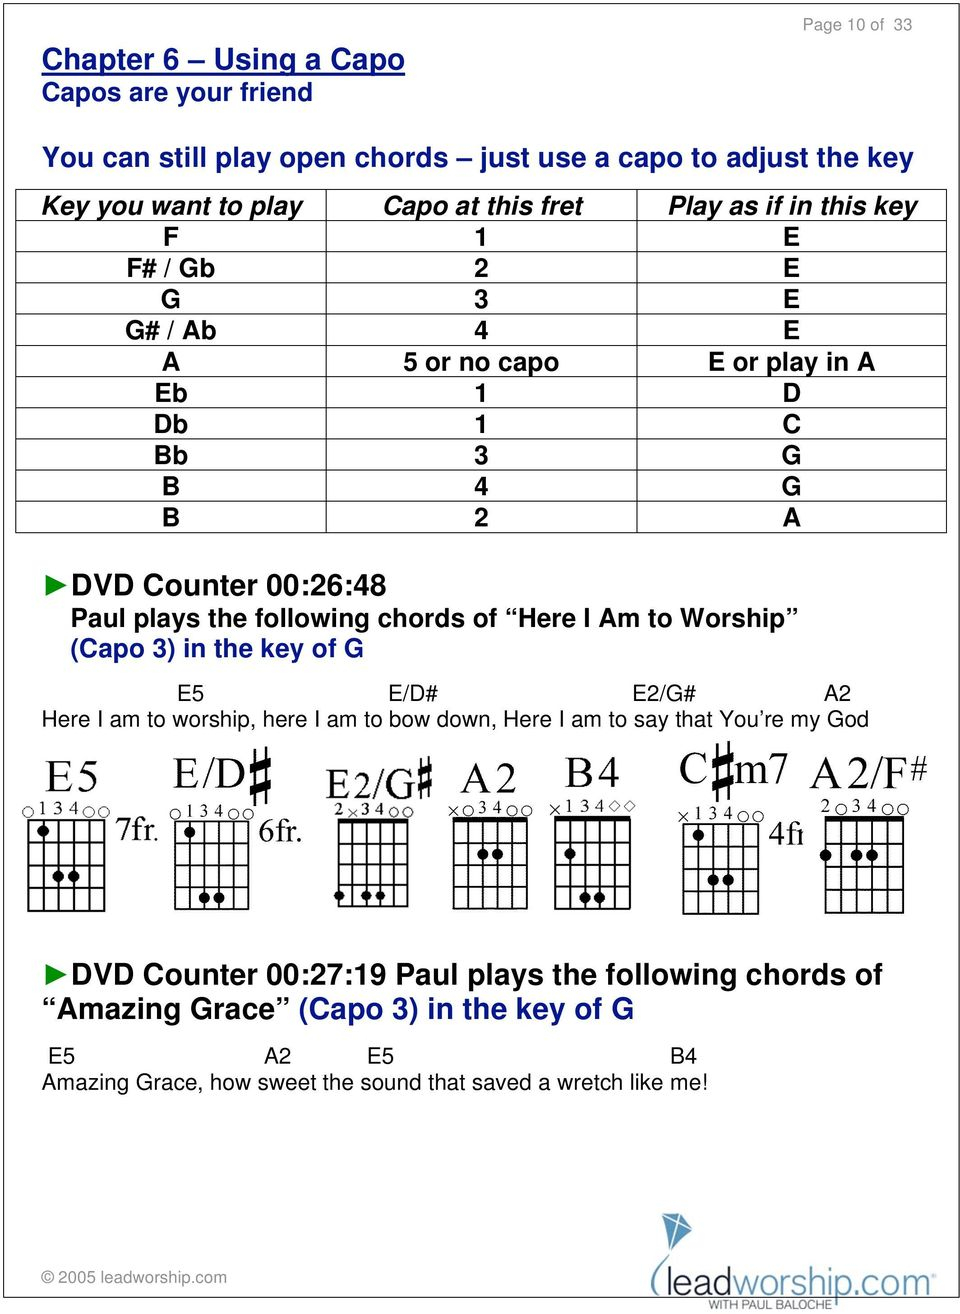 Here I Am To Worship Chords Companion Instruction Booklet Pdf